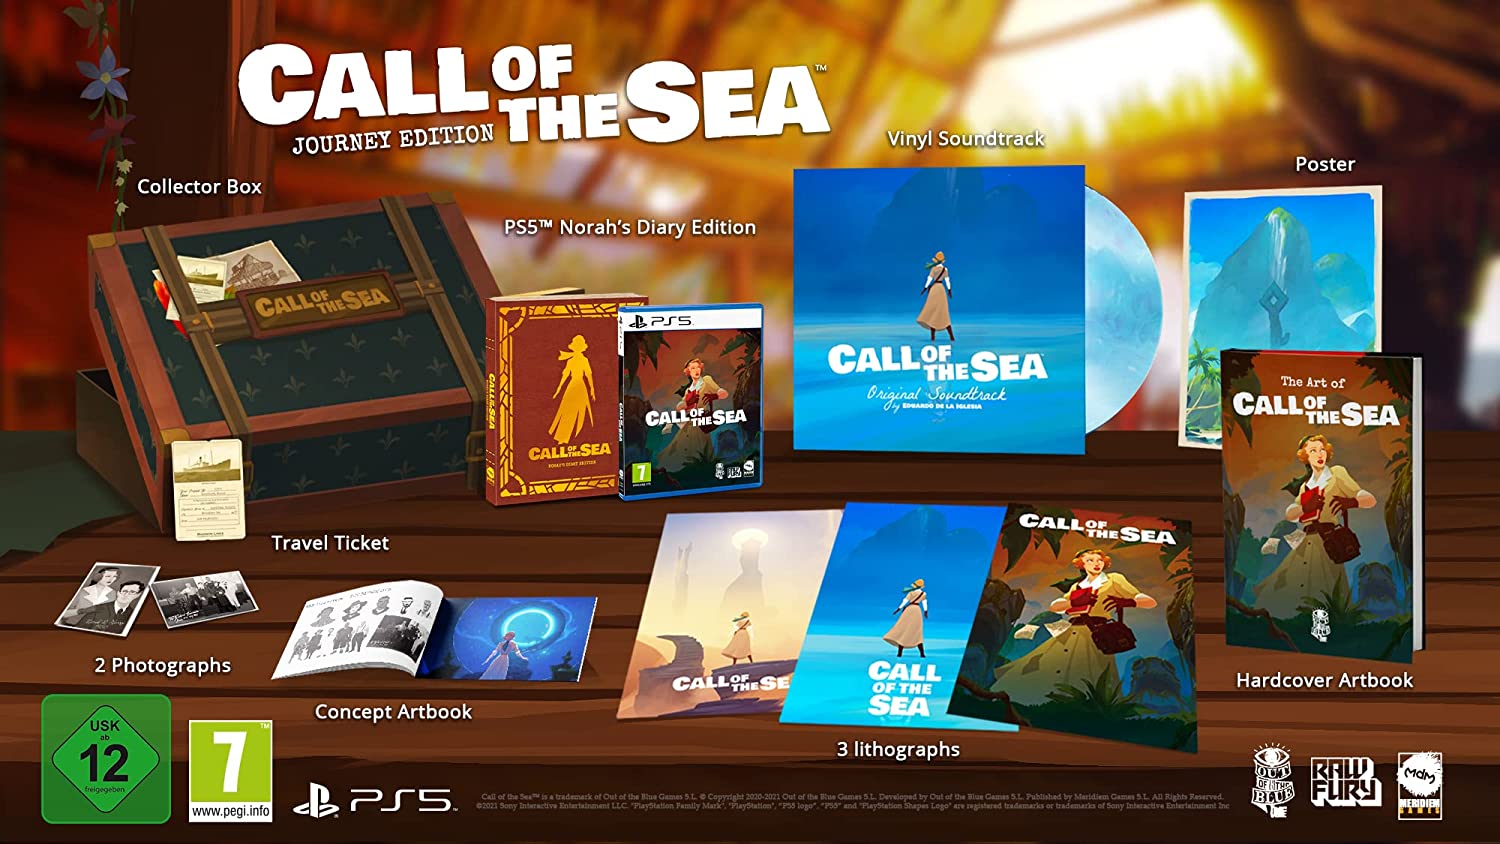 Call of the Sea - Journey Edition